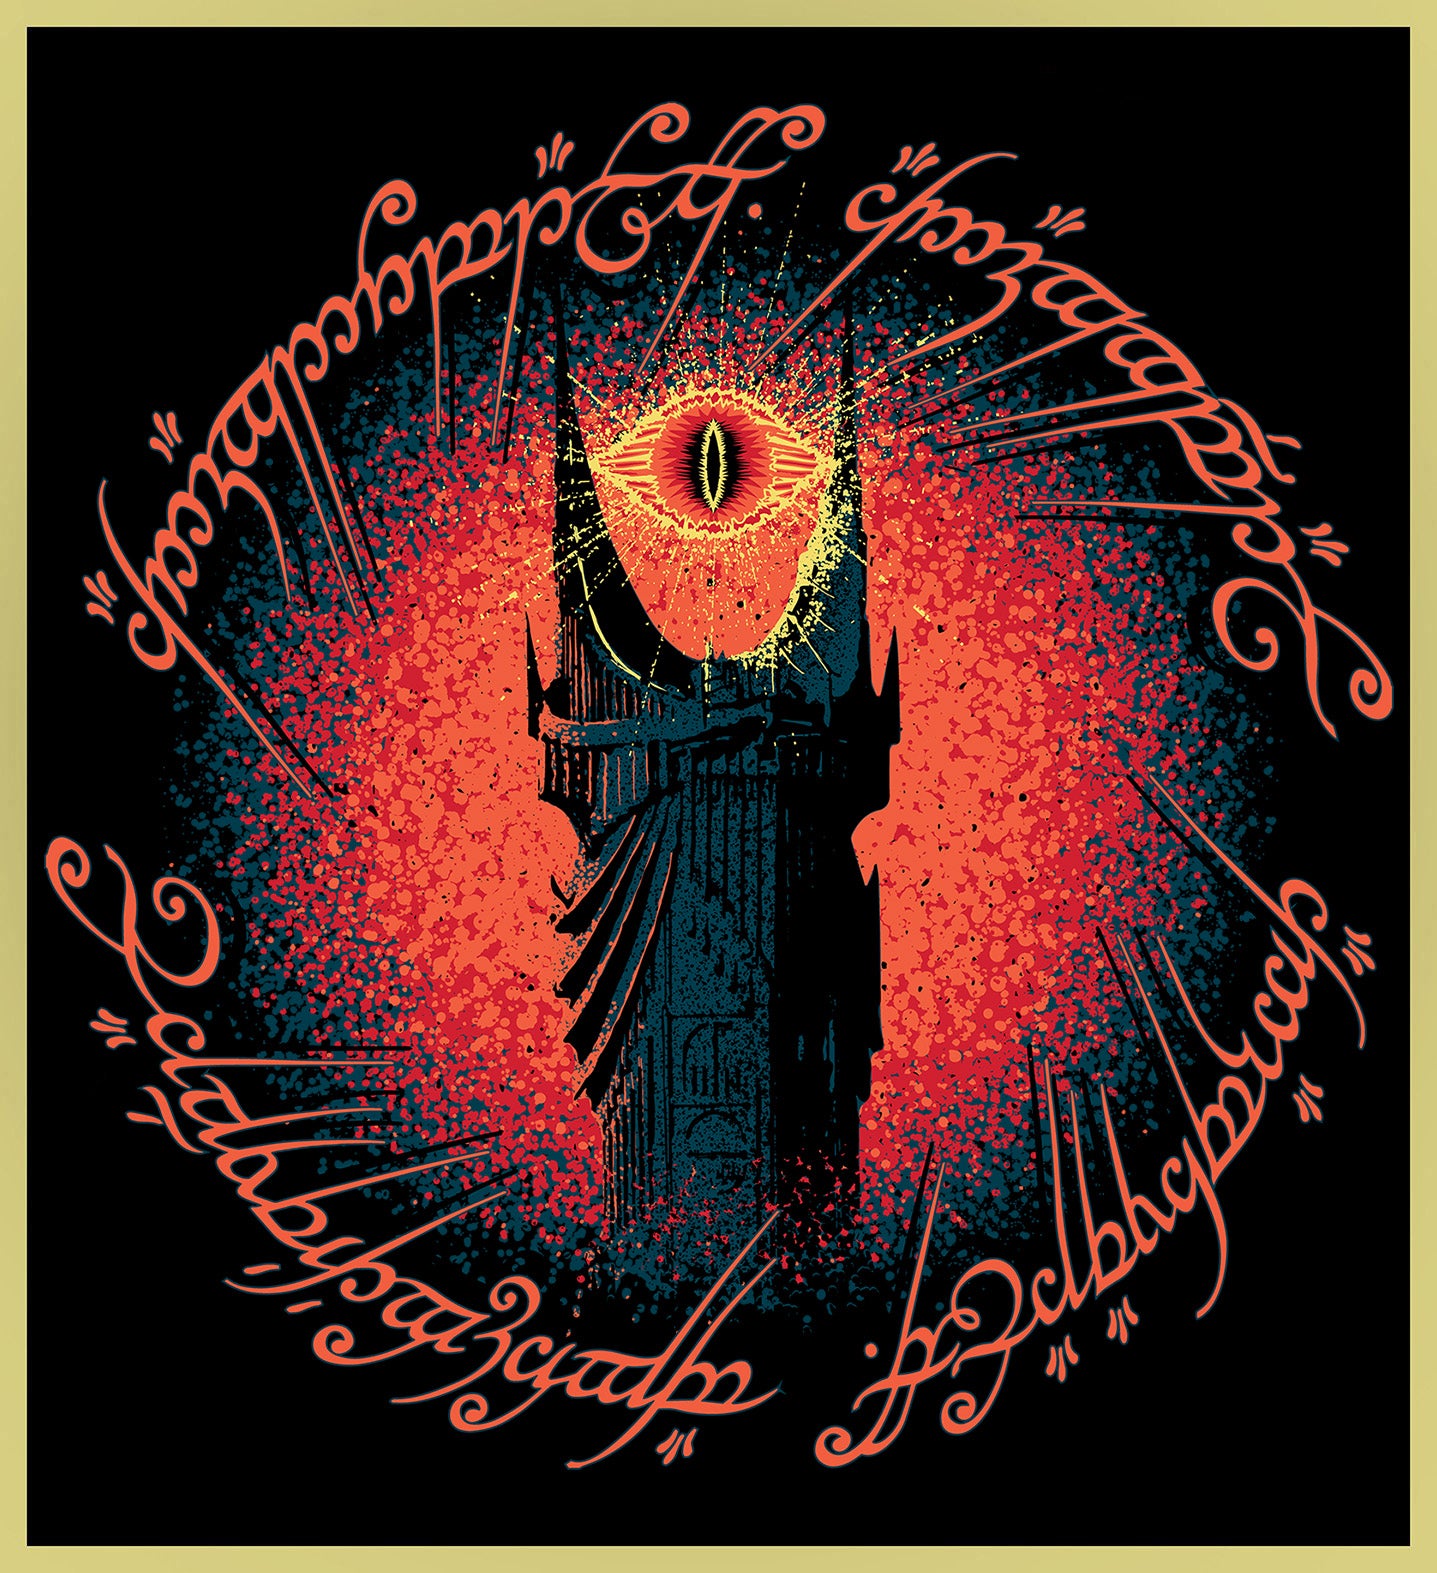 LORD OF THE RINGS - BARAD-DÛR - NEW POP TURBO TEE!